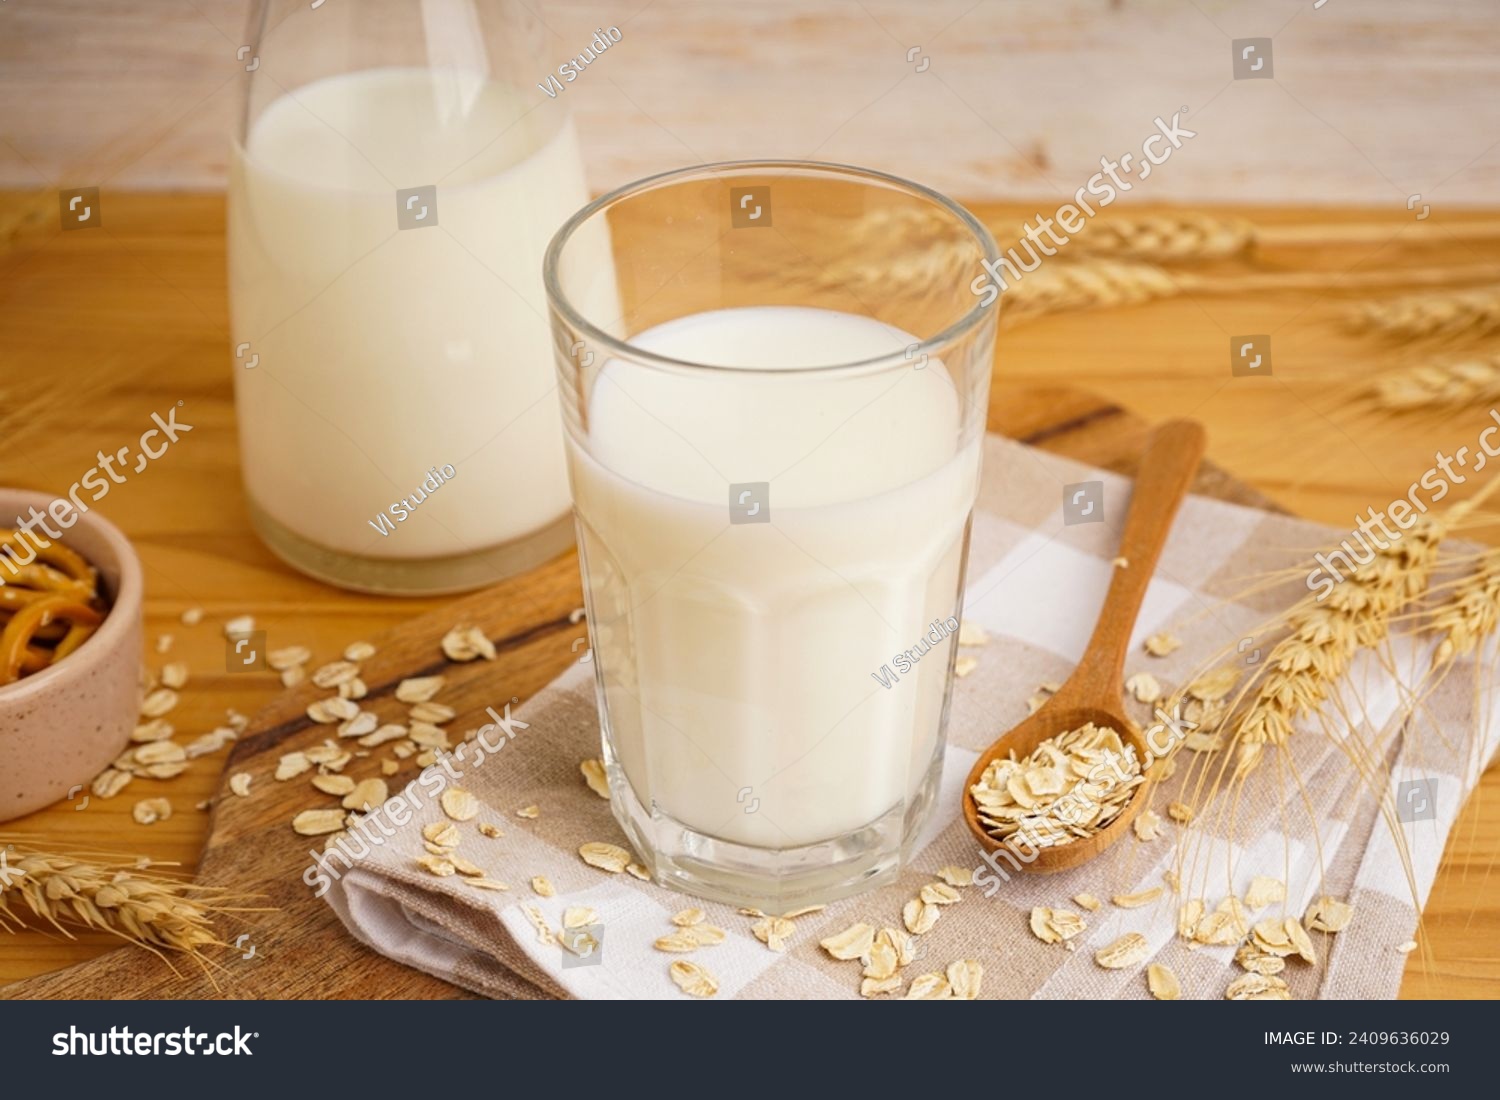 Glass and jug of fresh milk on wooden table against color background, with oatmeal. #2409636029